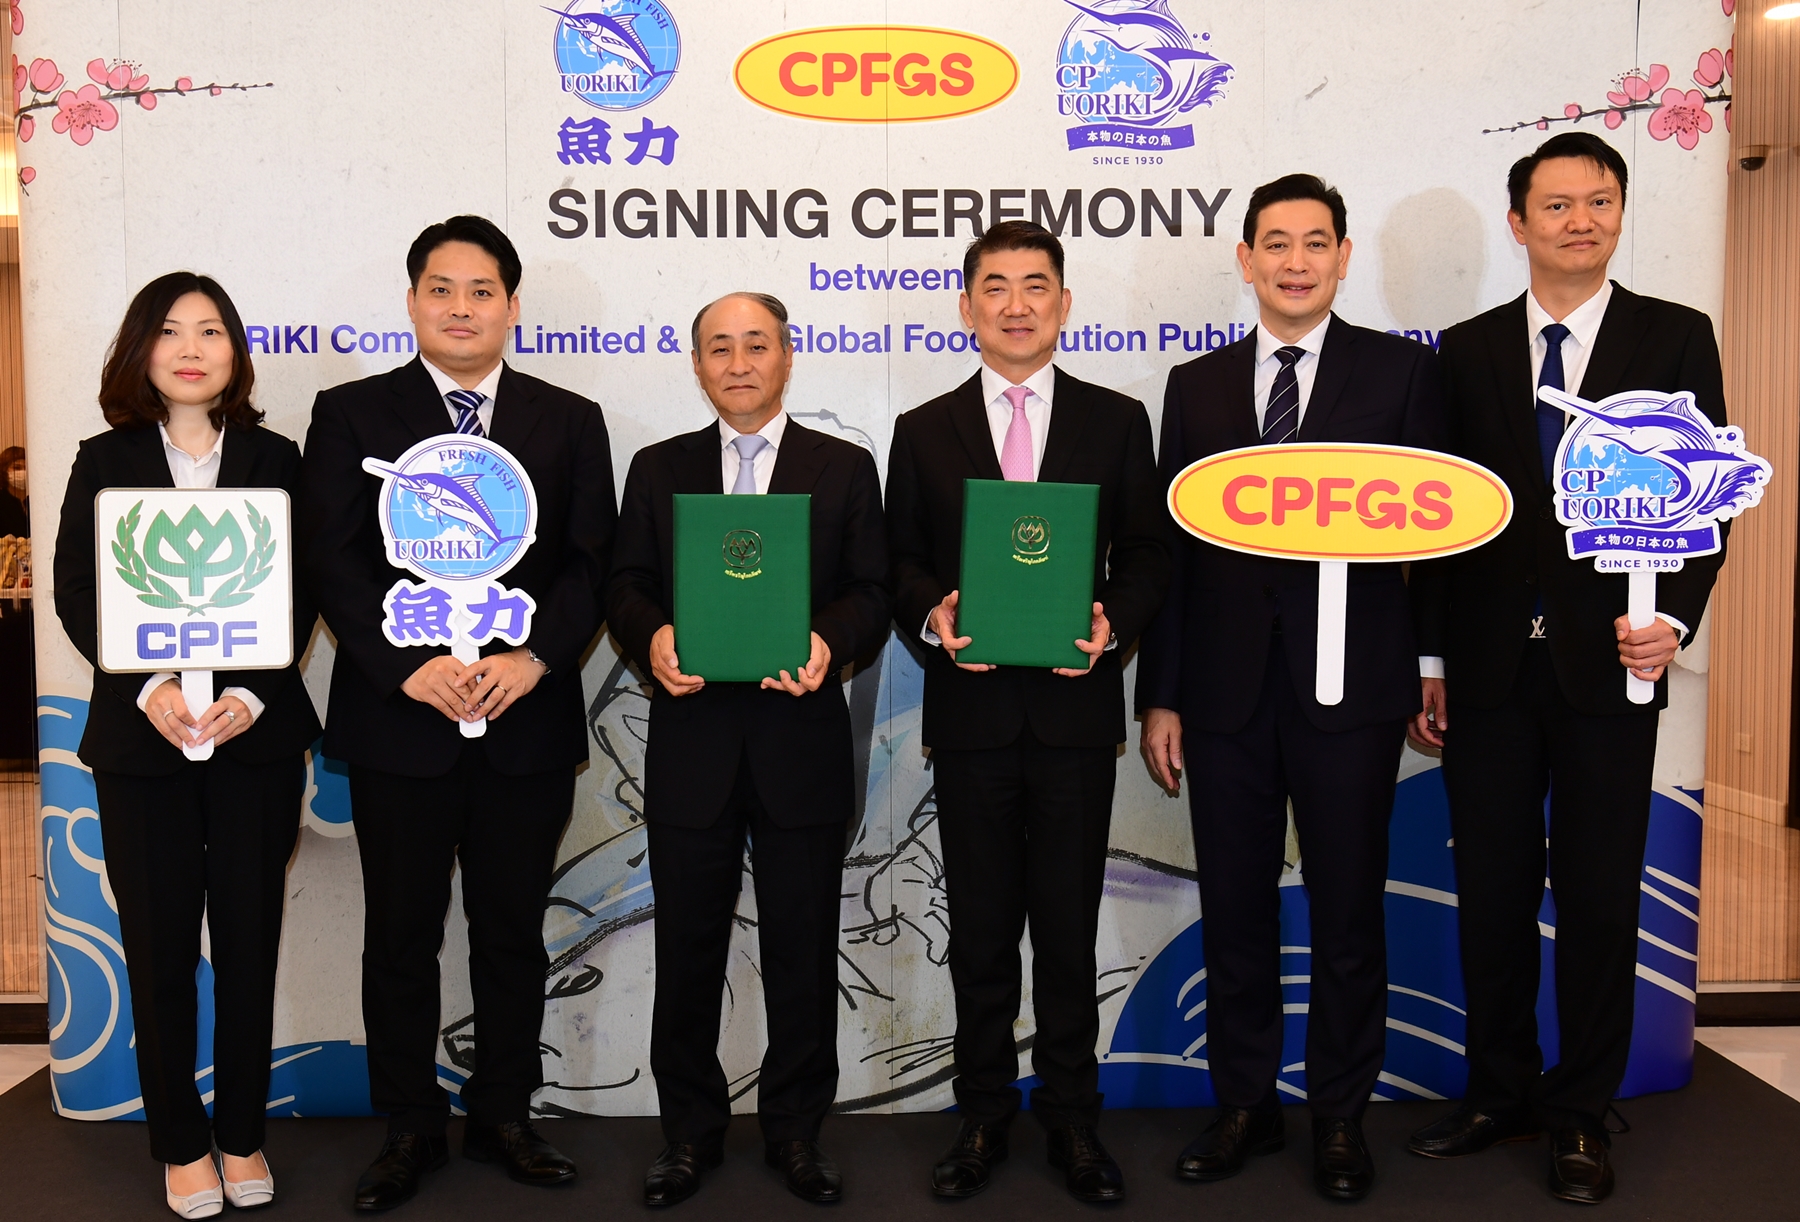 CP-Uoriki established to bring premium fresh fish and seafood from Japan to discerning consumers in Thailand